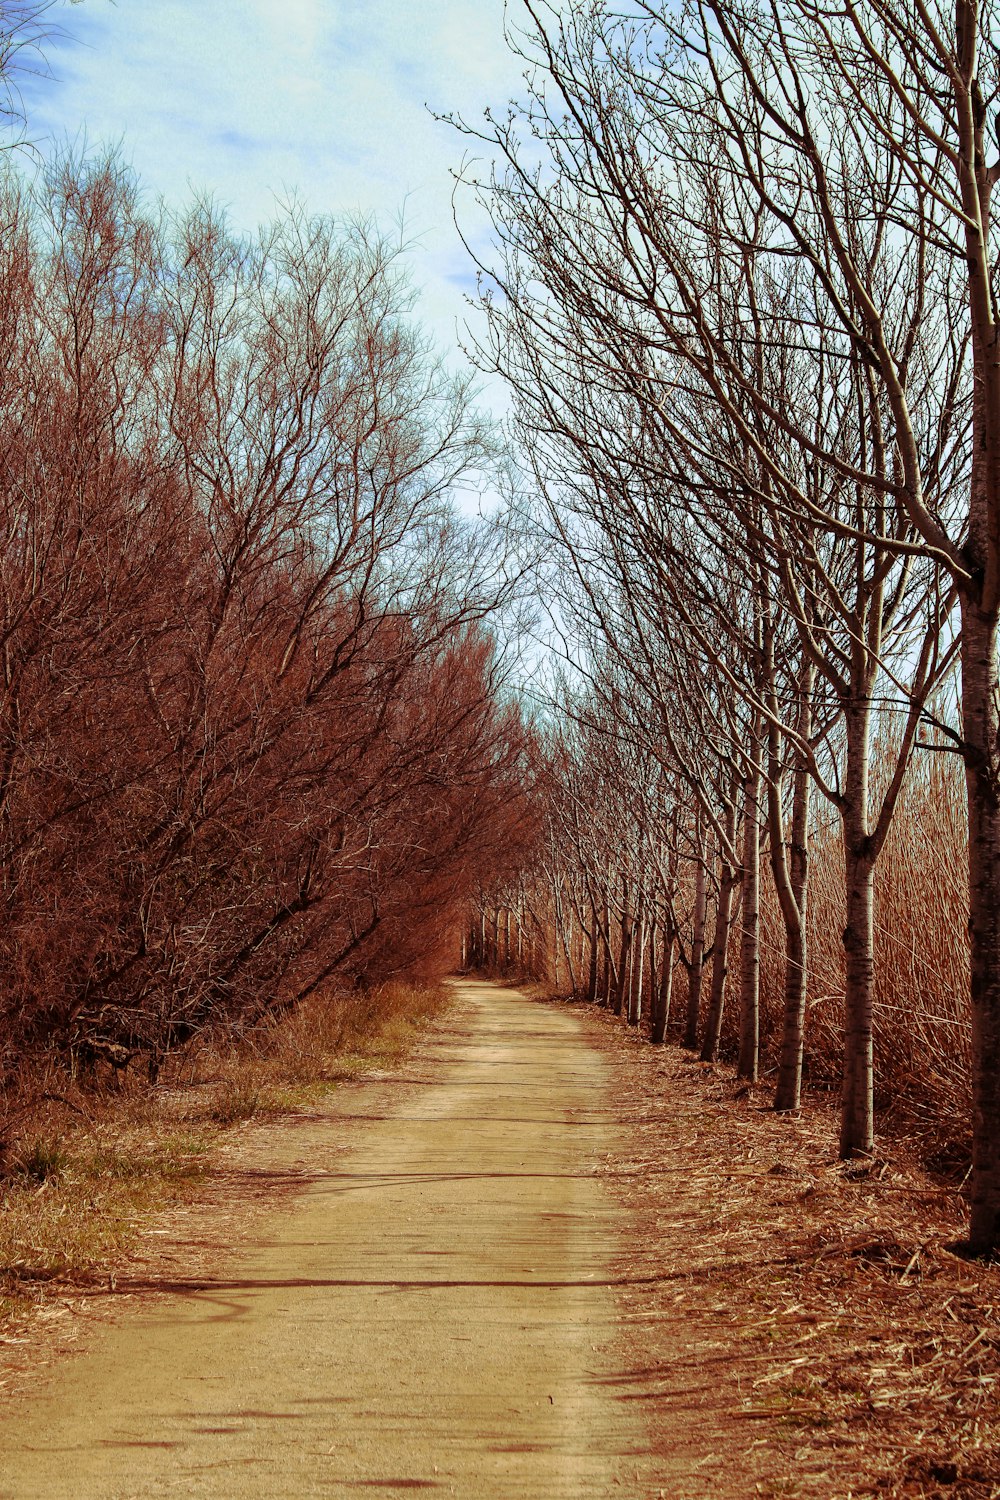 a dirt road surrounded by trees with no leaves